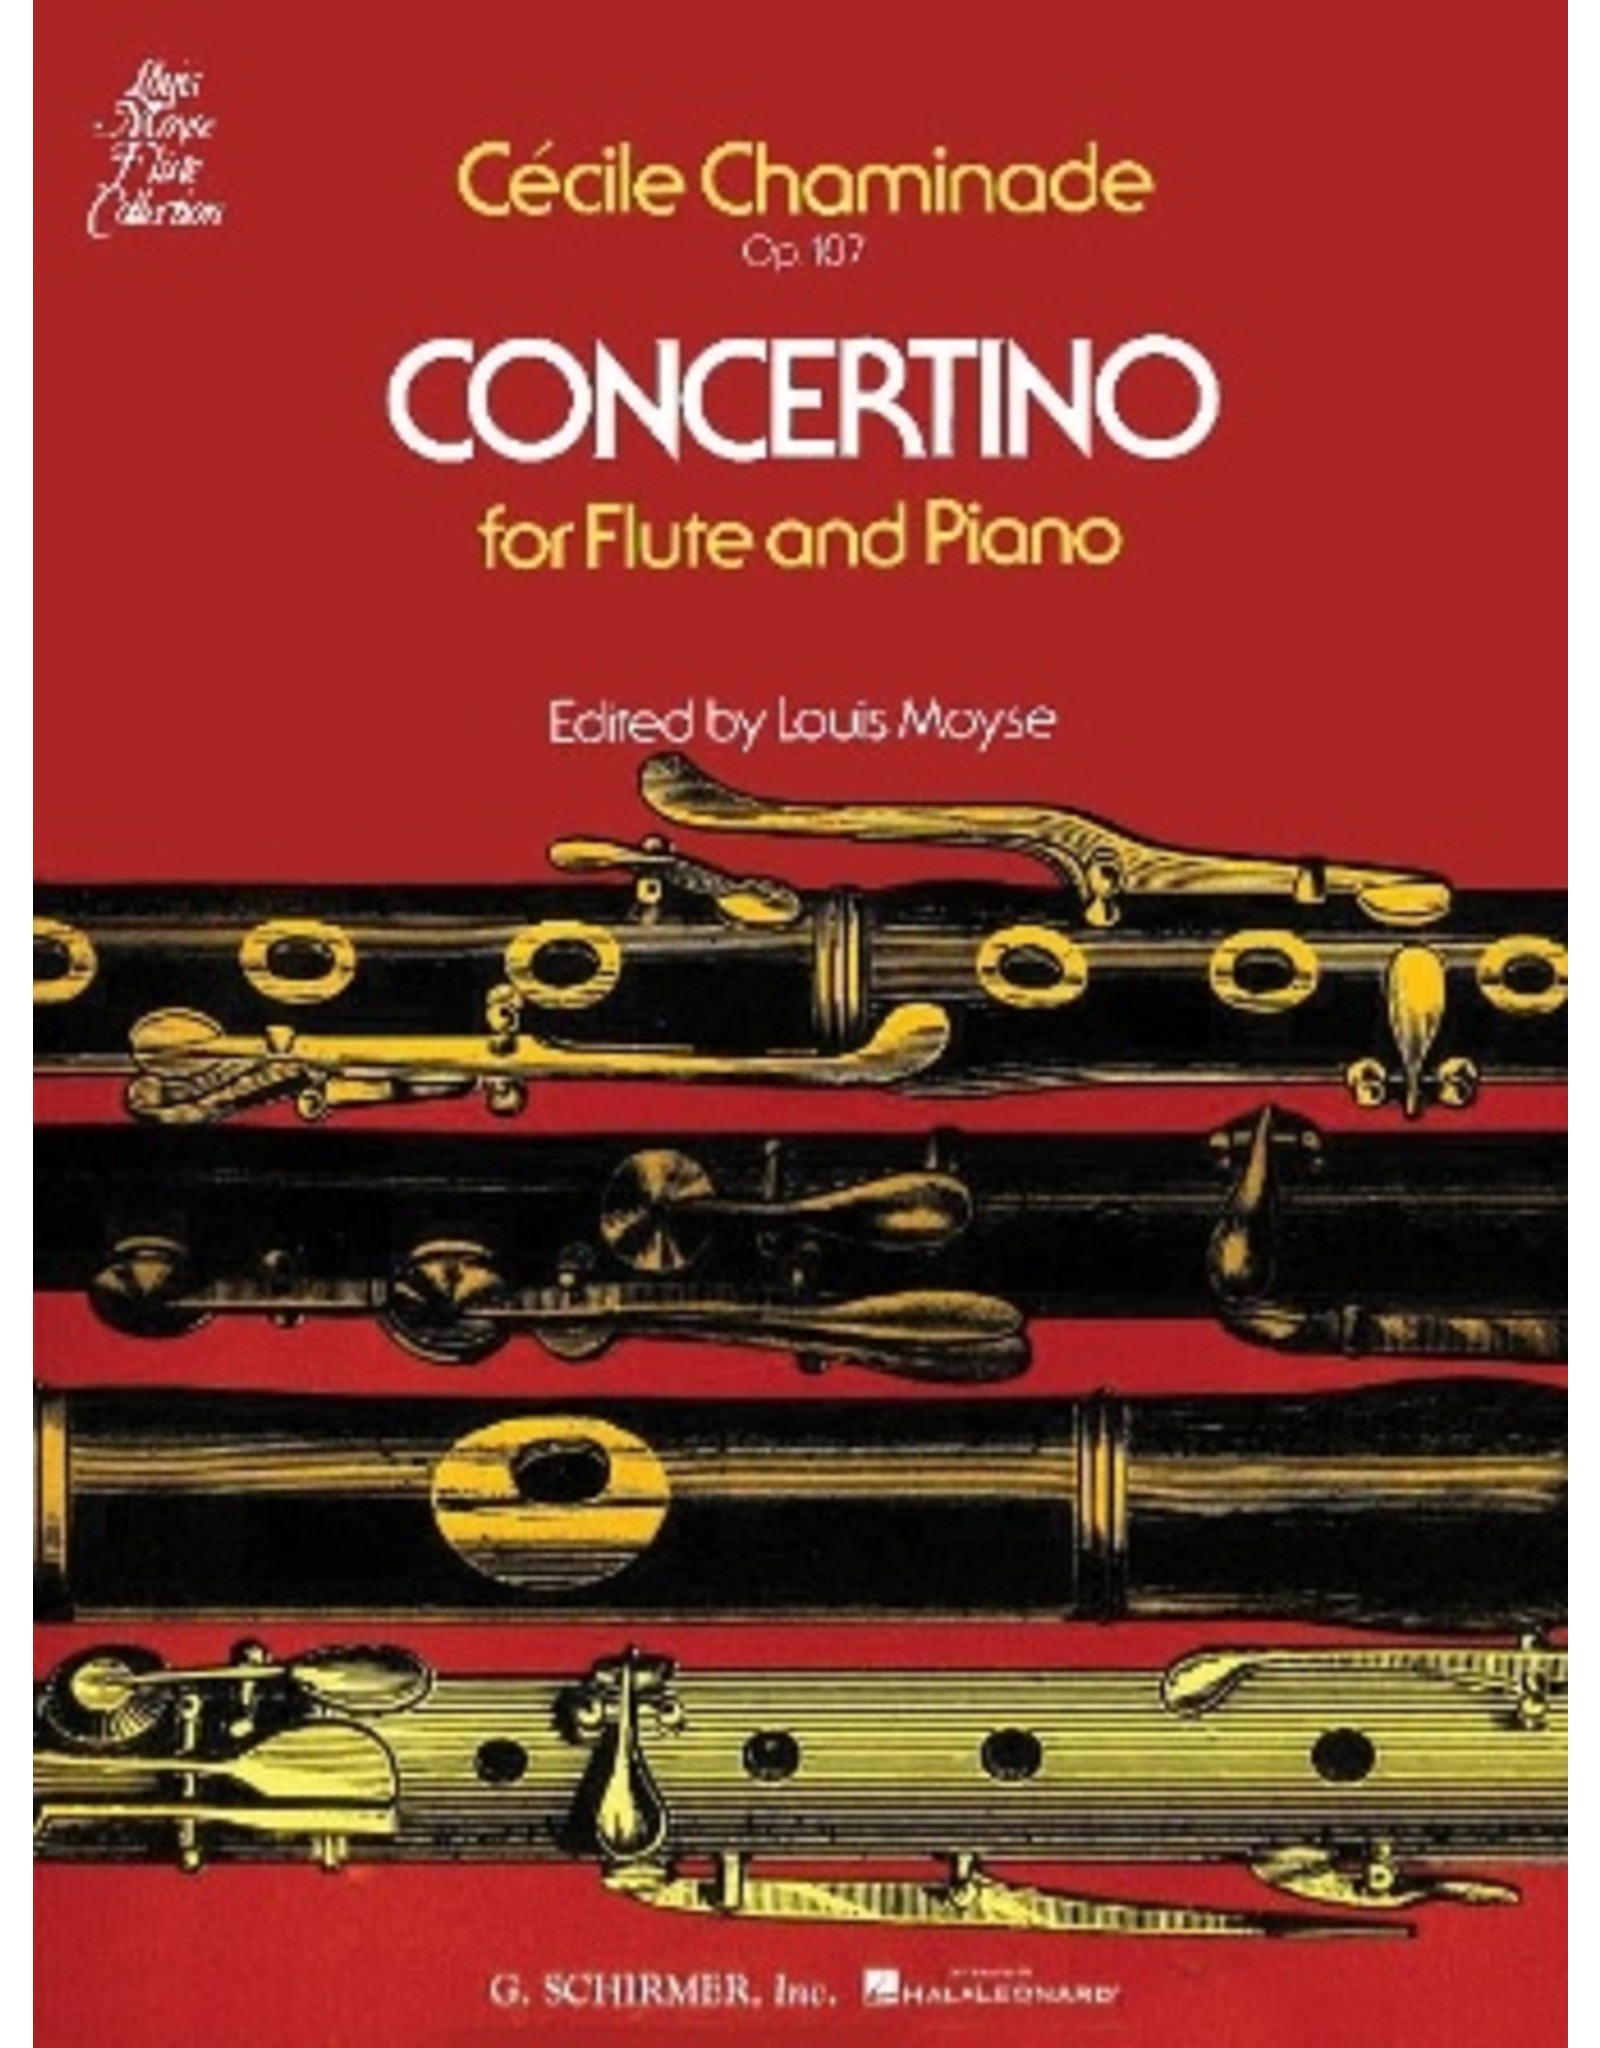 Hal Leonard Concertino, Op. 107 for Flute & Piano edited by Louis Moyse Woodwind Solo